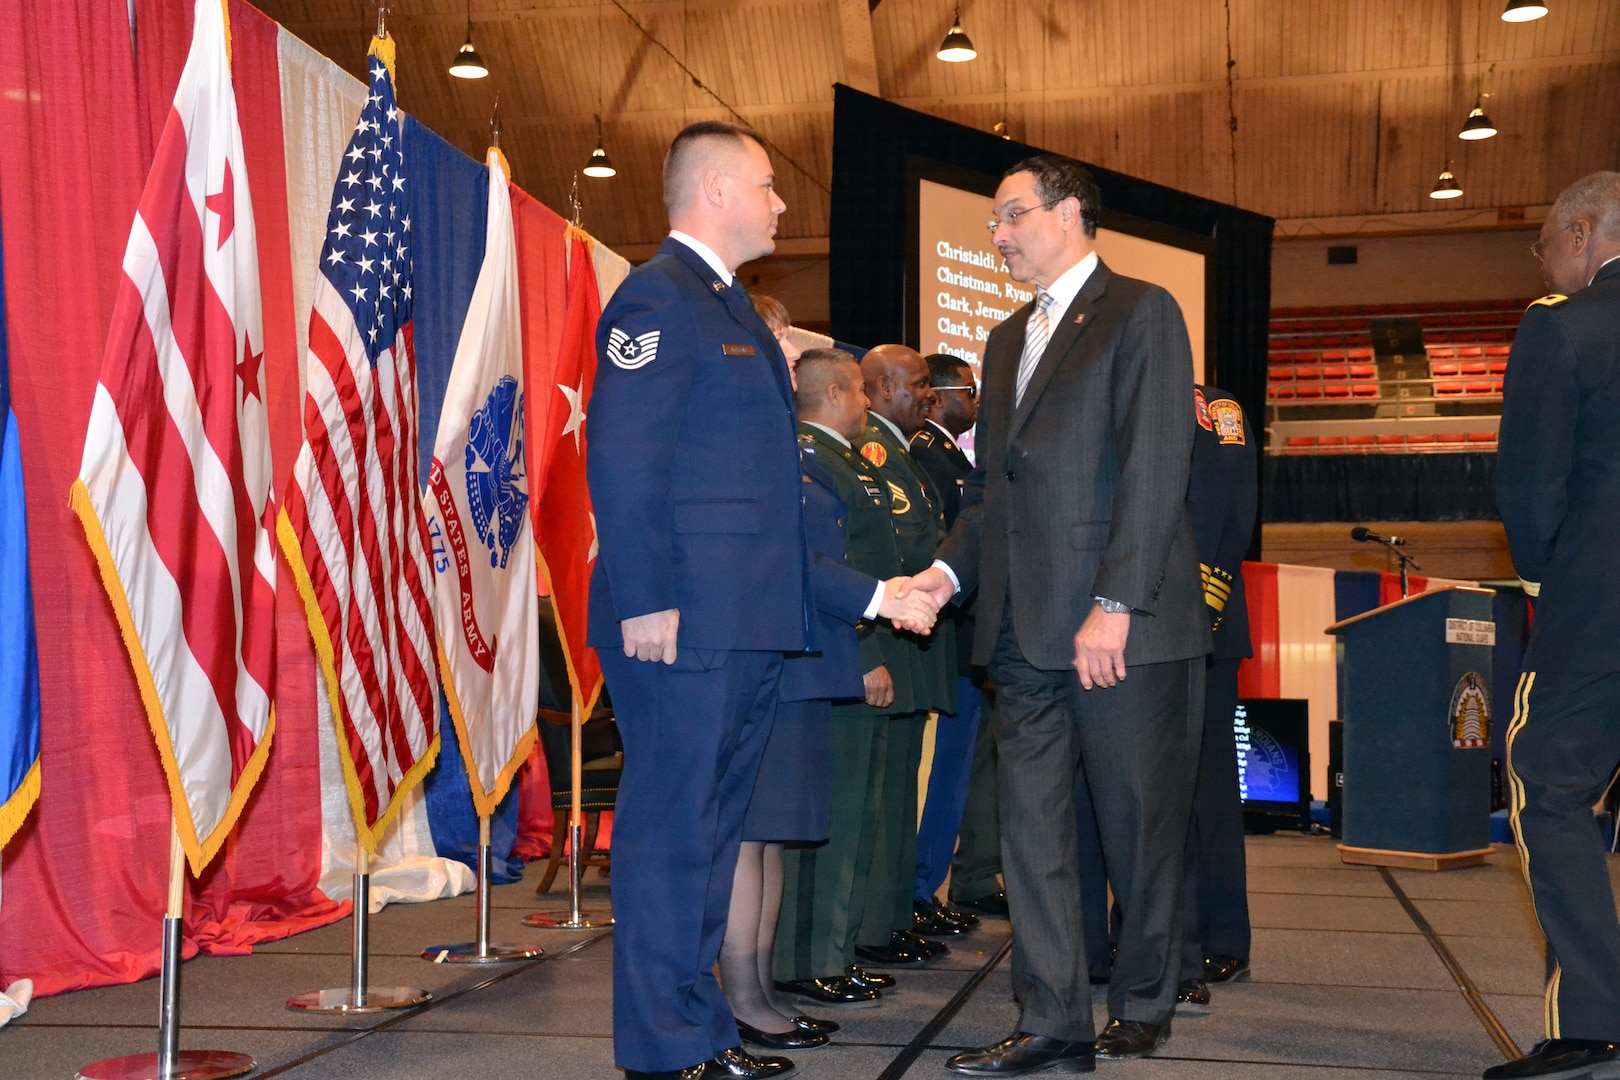 D.C. Mayor Vincent Gray thanks Soldiers and Airman for their service during the D.C. National Guard's Awards and Decorations Ceremony on Dec. 4, 2011.